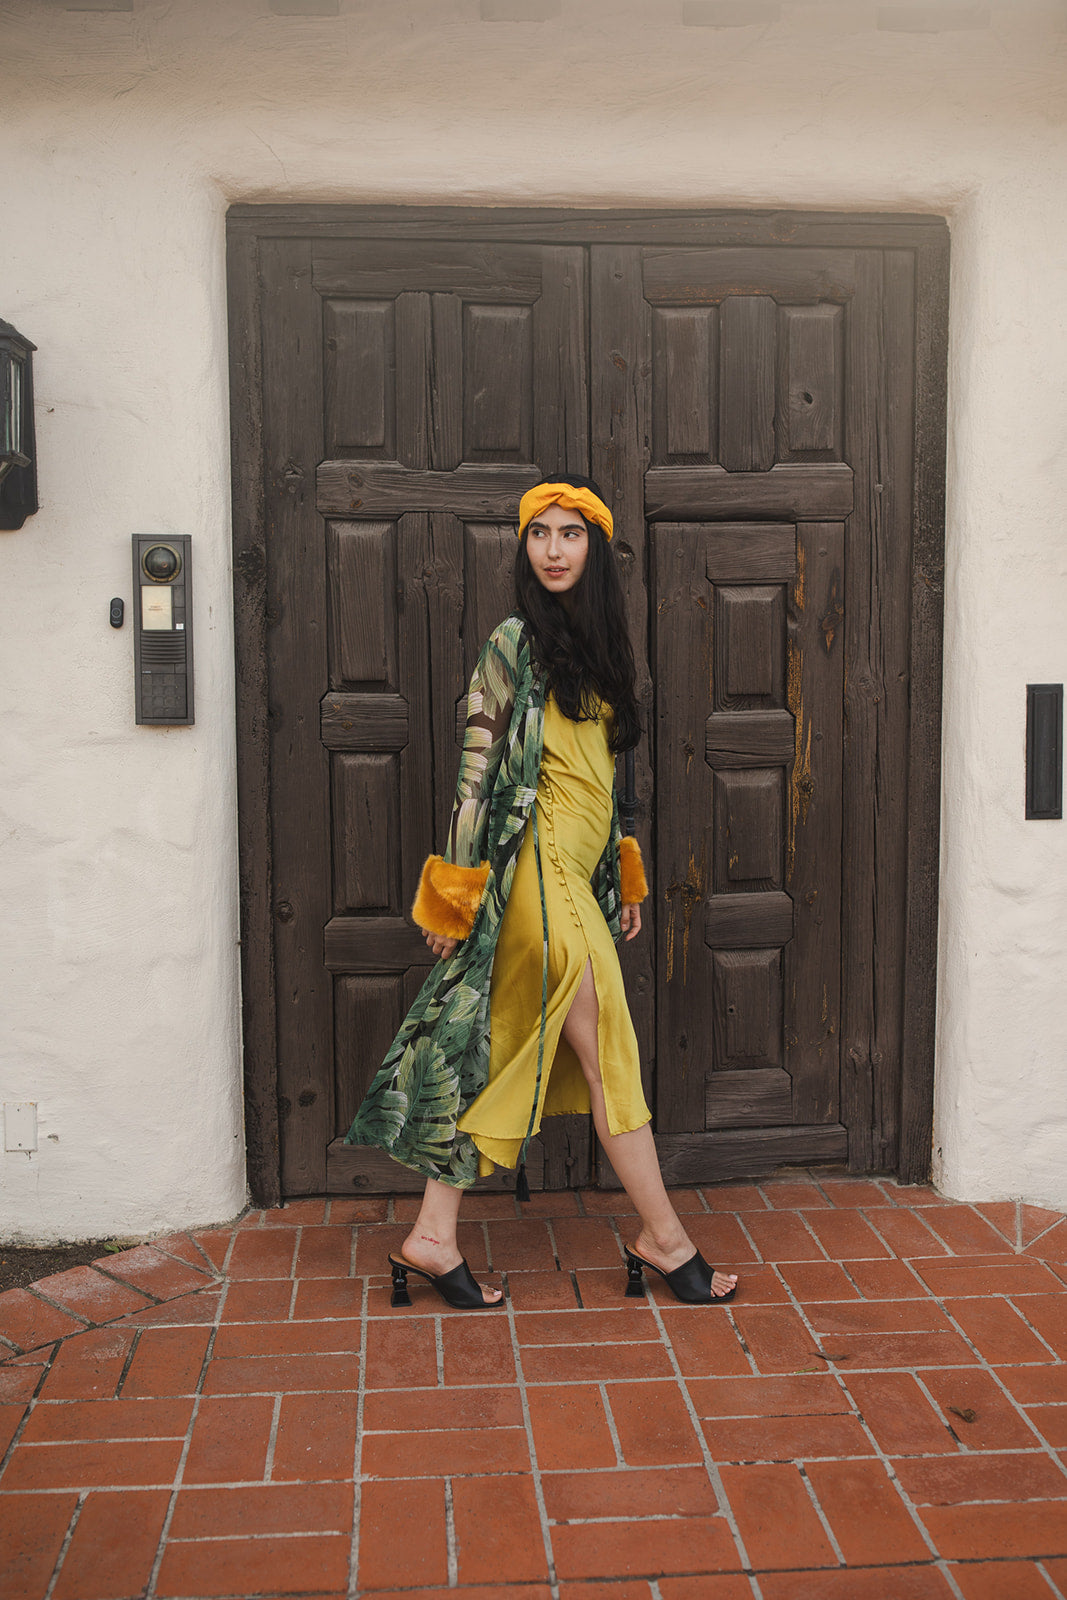 jennafer grace Palma Faux Fur Duster black and green tropical botanical palm leaf print semi-sheer duster with mustard yellow faux fur cuffs light jacket coat robe coverup layering boho bohemian hippie revival unisex handmade in California USA